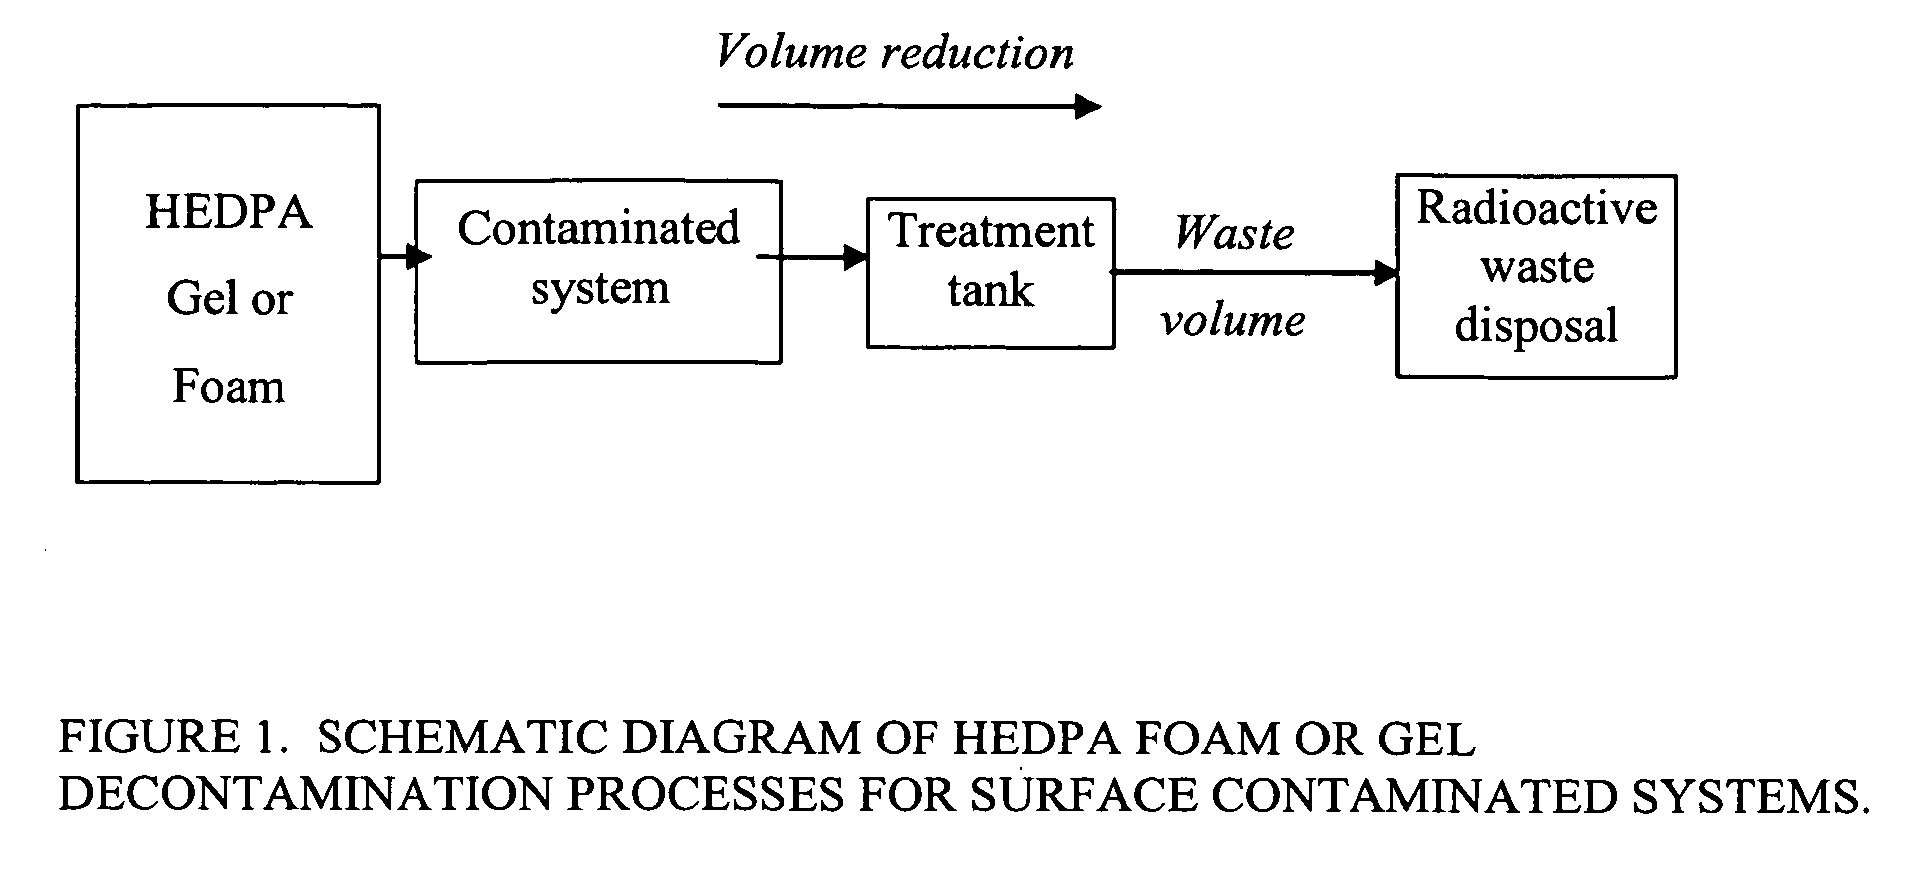 Foam and gel methods for the decontamination of metallic surfaces